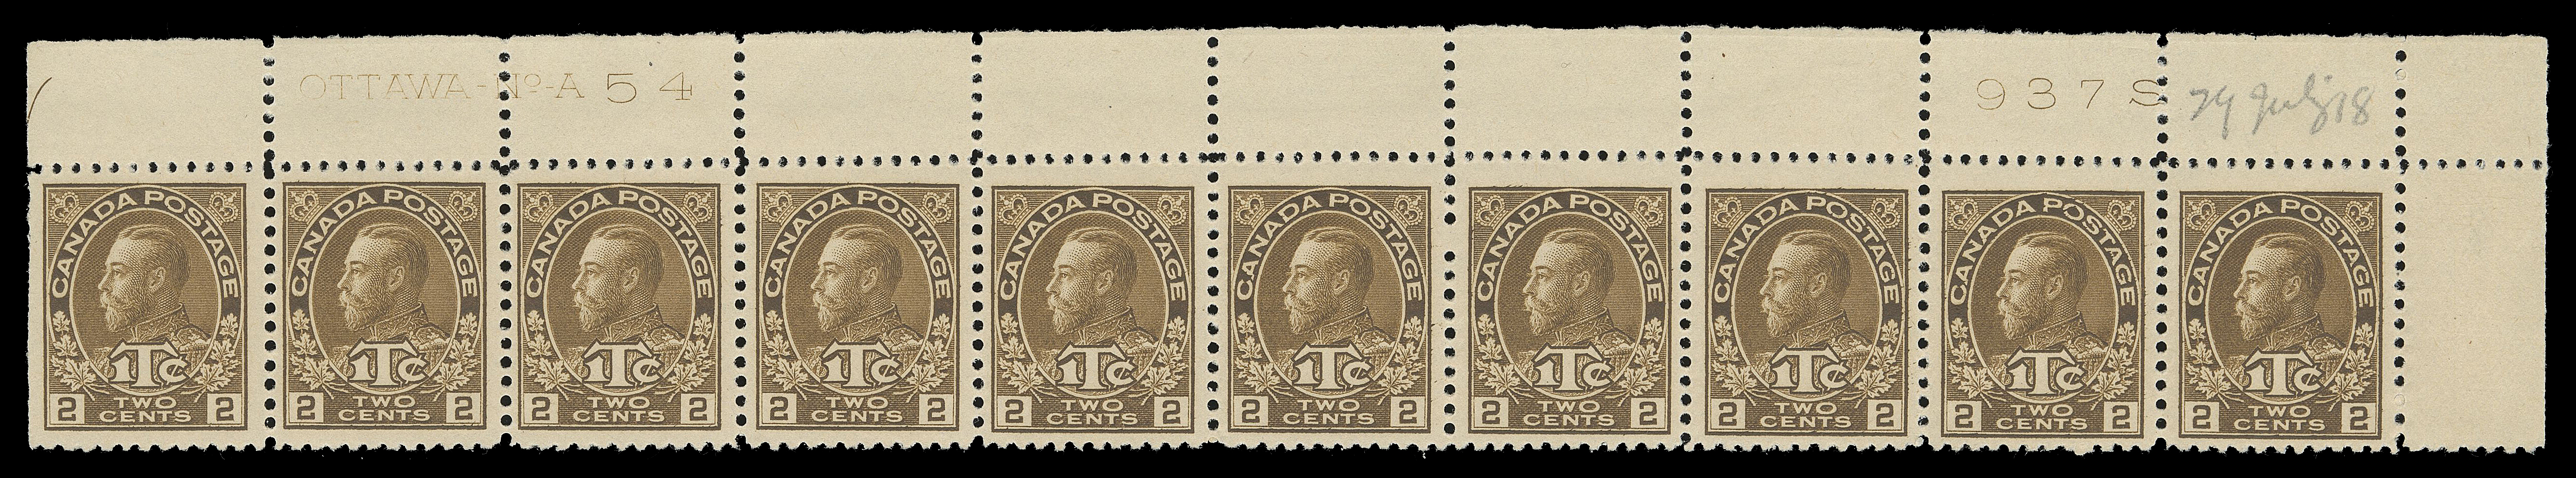 ADMIRAL STAMPS  MR4,Upper right Plate 54 strip of ten, well centered with rich colour, hinged on straight edge stamp and right selvedge, natural gum skip on third stamp, nine stamps NH, VF (Unitrade cat. $1,120)